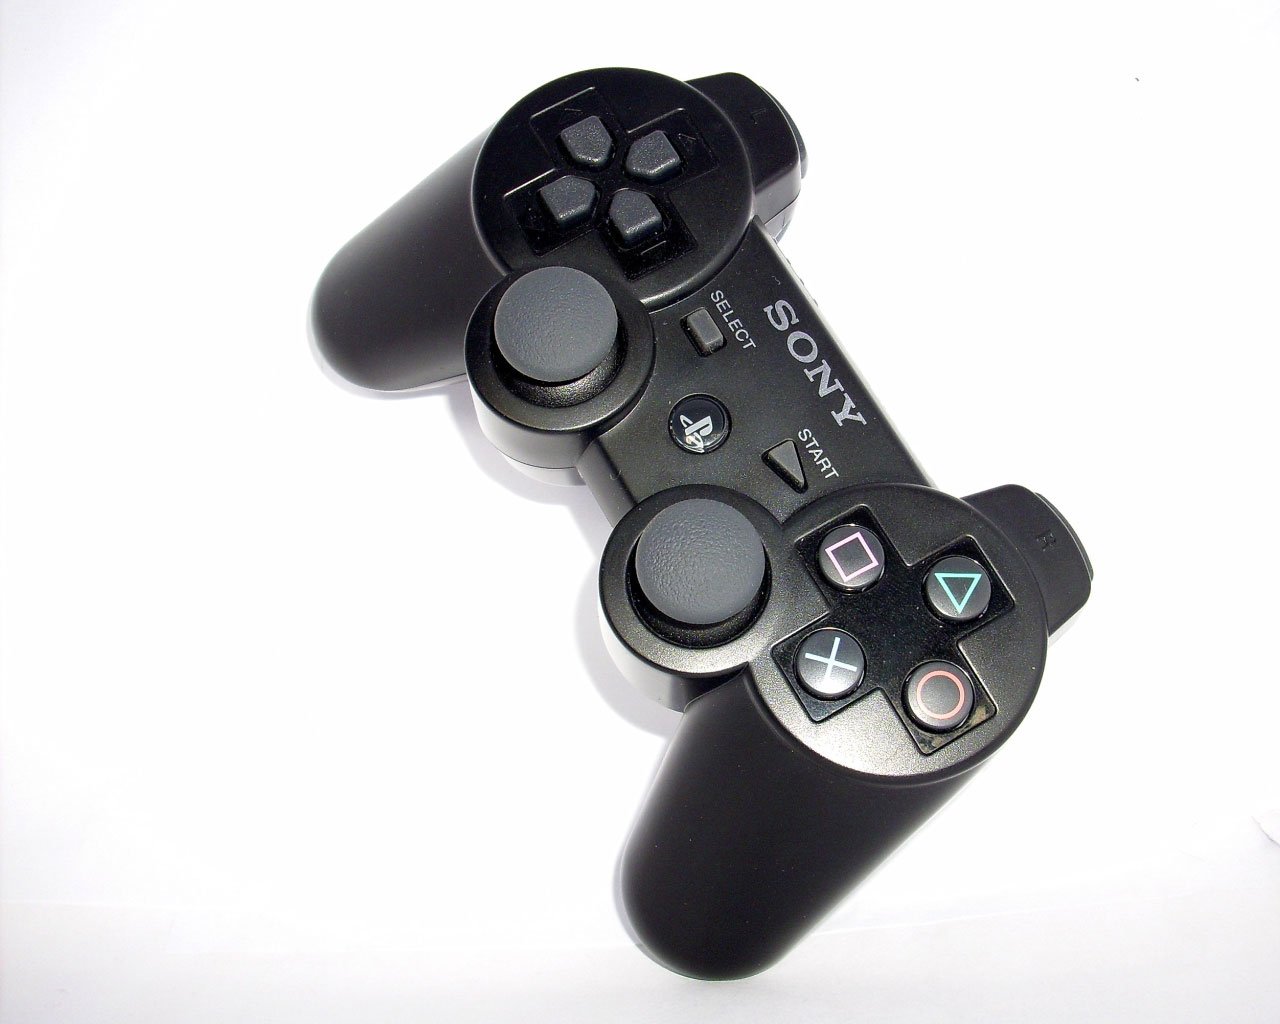 Download free photo of Ps console, controller, sixaxis, ps3 controller